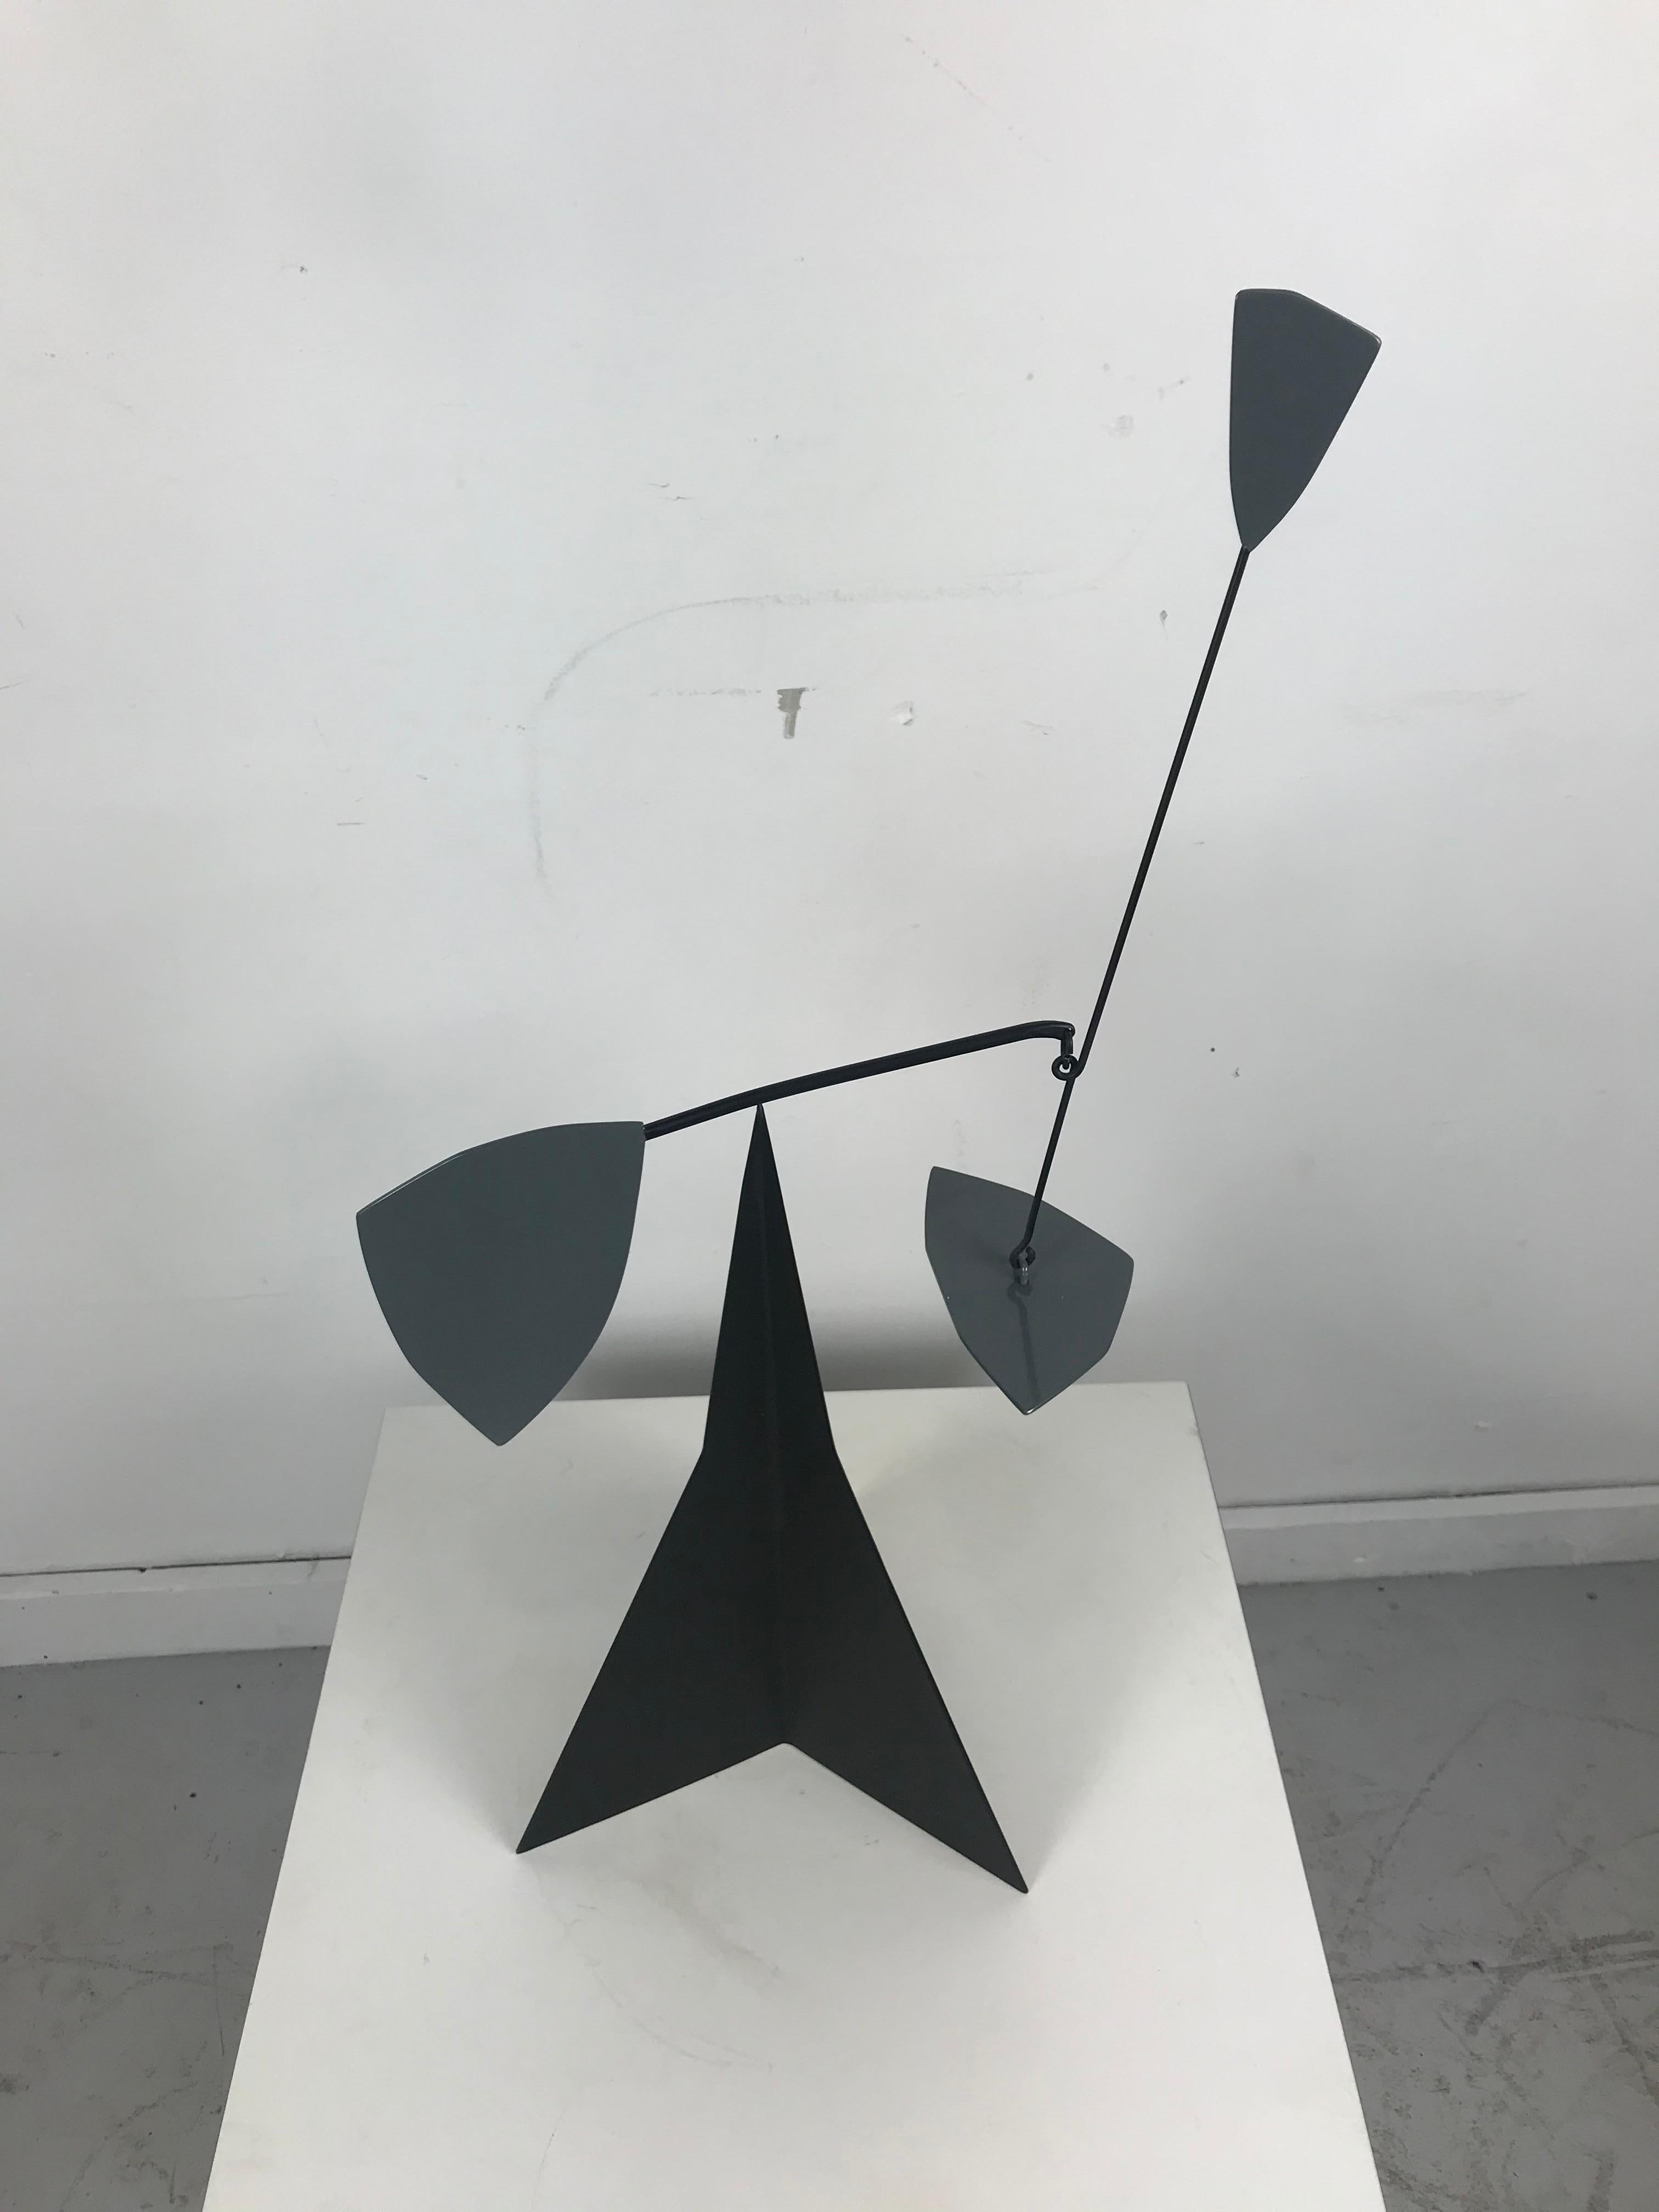 Painted Stunning Kinetic Modernist Stabile Sculpture by Graham Mitchell Sears